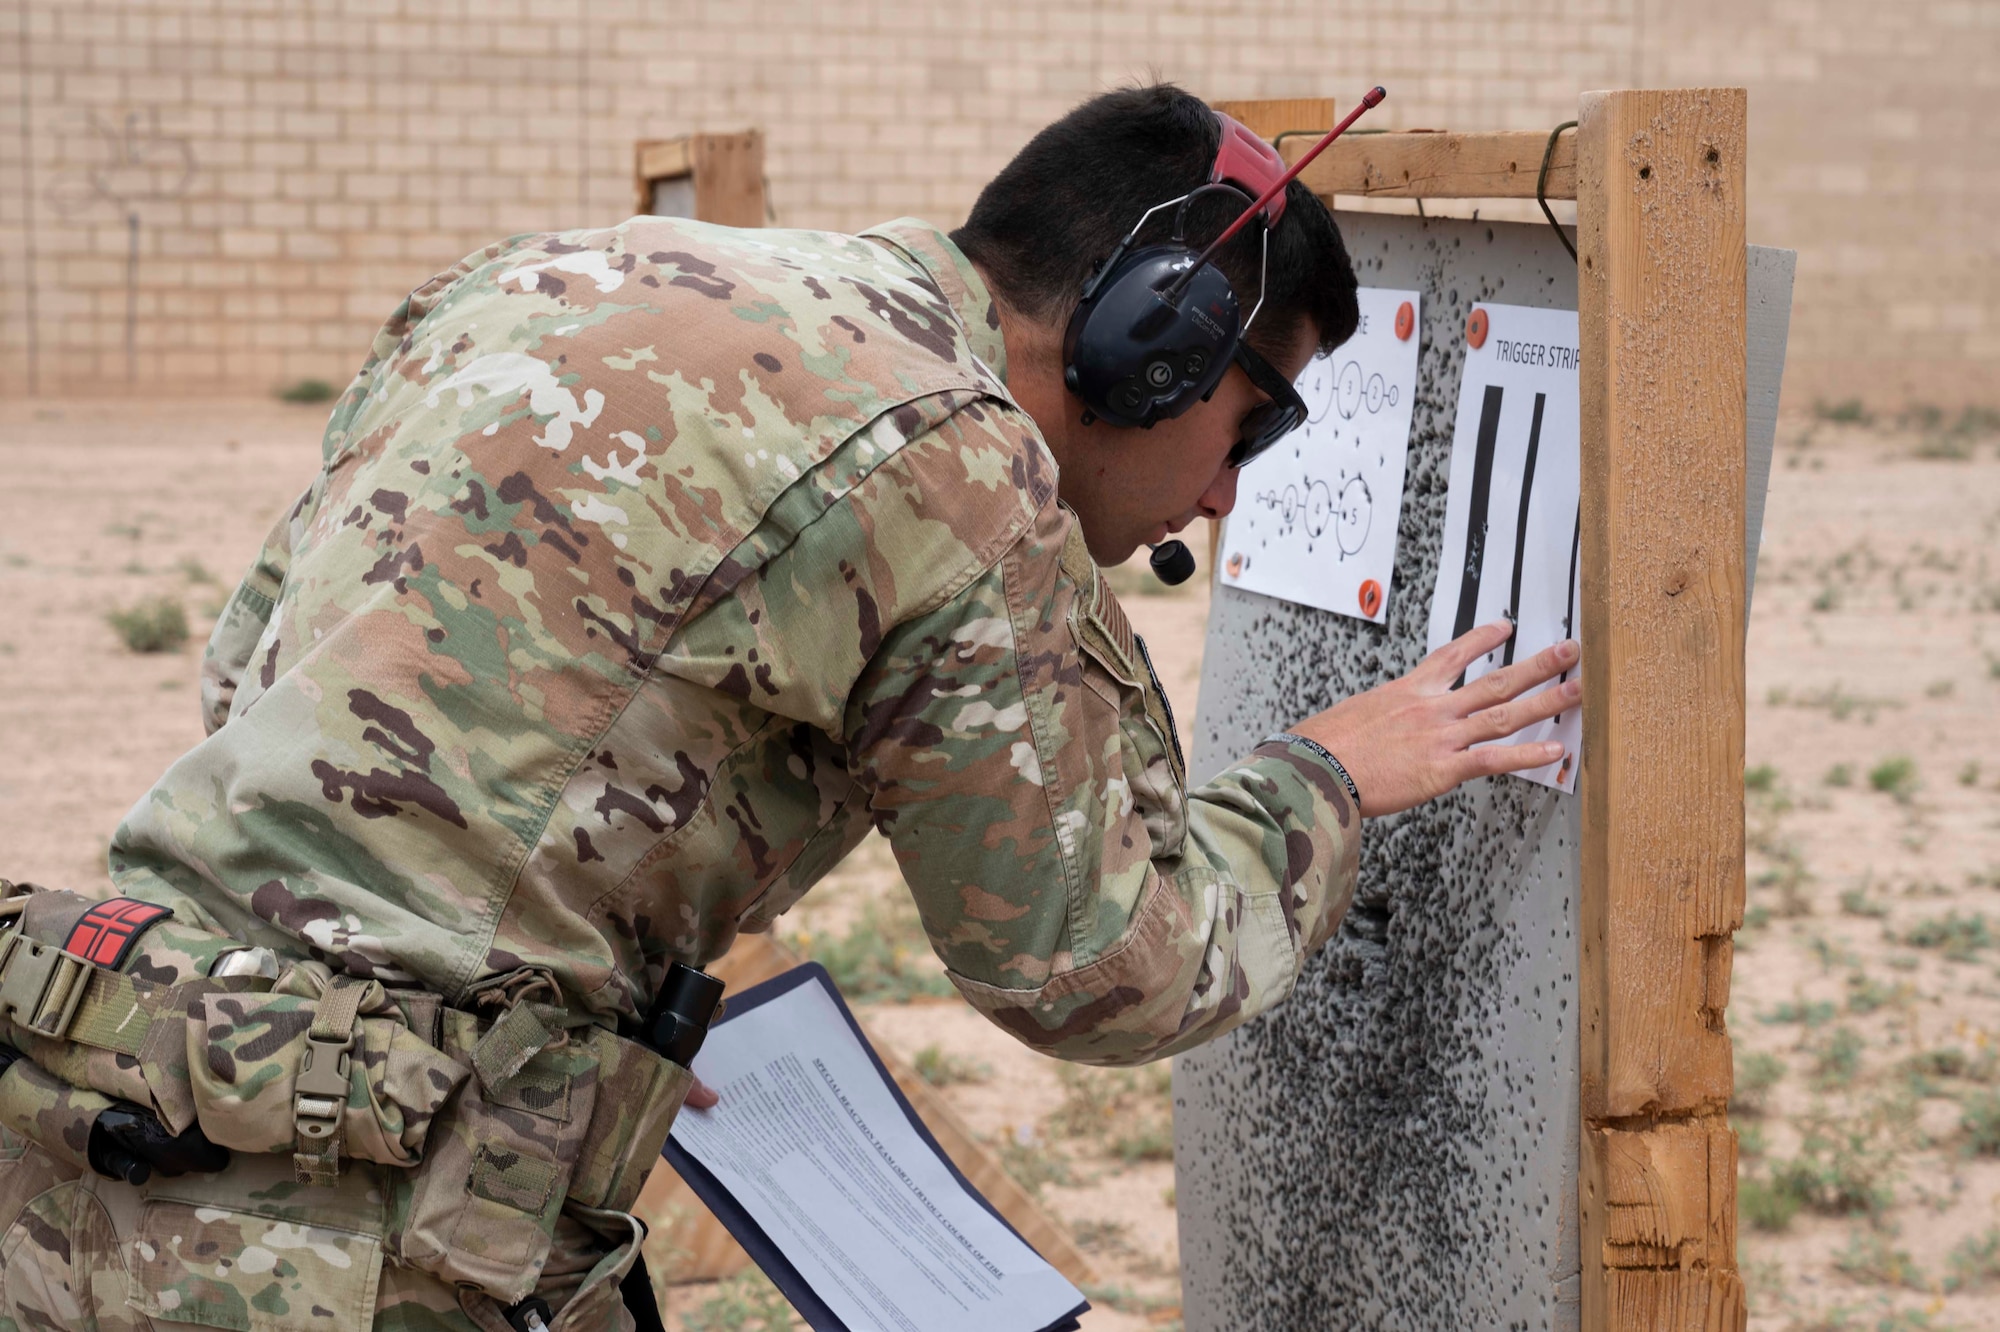 U.S. Air Force Staff Sgt. Chandler Docusen,  49th Security Forces Squadron unit trainer, inspects a target for accuracy during Special Reactions Team tryout at Holloman Air Force Base, New Mexico, June 9, 2023. SRT tryouts determine the capability and accuracy of airmen who are qualified to handle high-risk crisis situations. (U.S. Air Force photo by Airman 1st Class Michelle Ferrari)